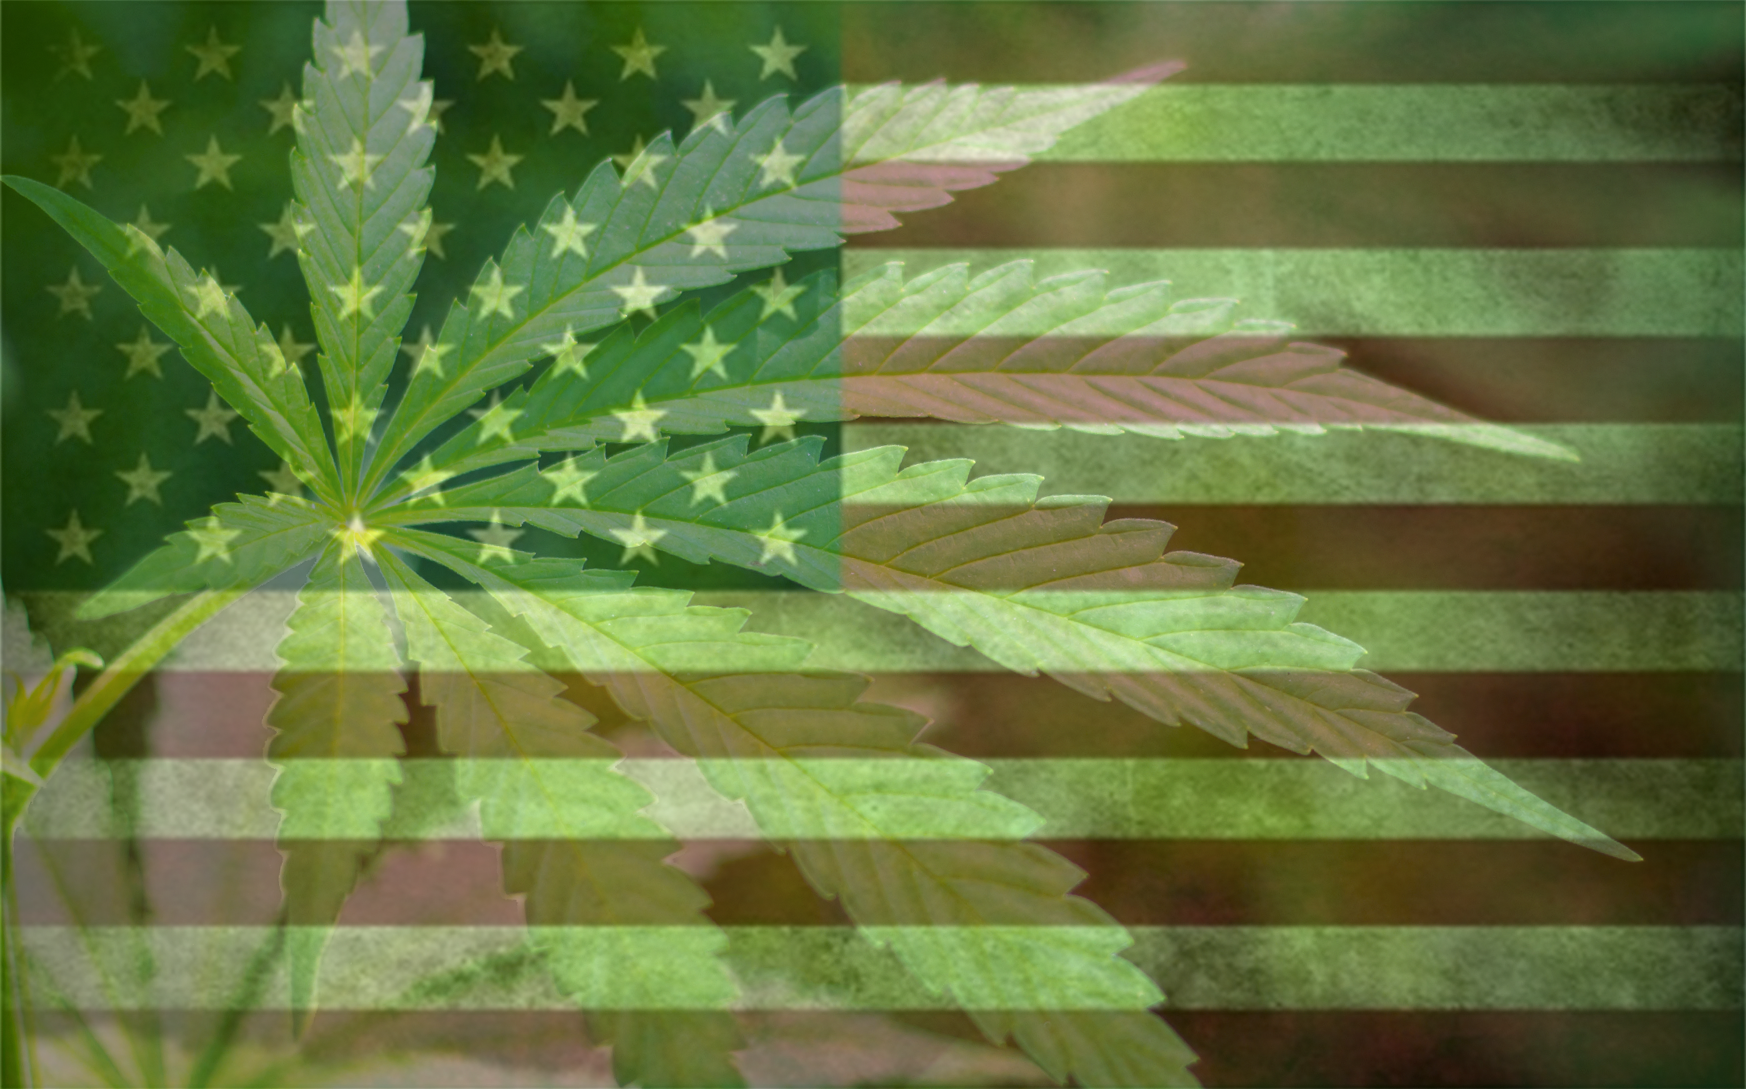 Congress Is Going to Vote on Federally Legalizing Weed This Week